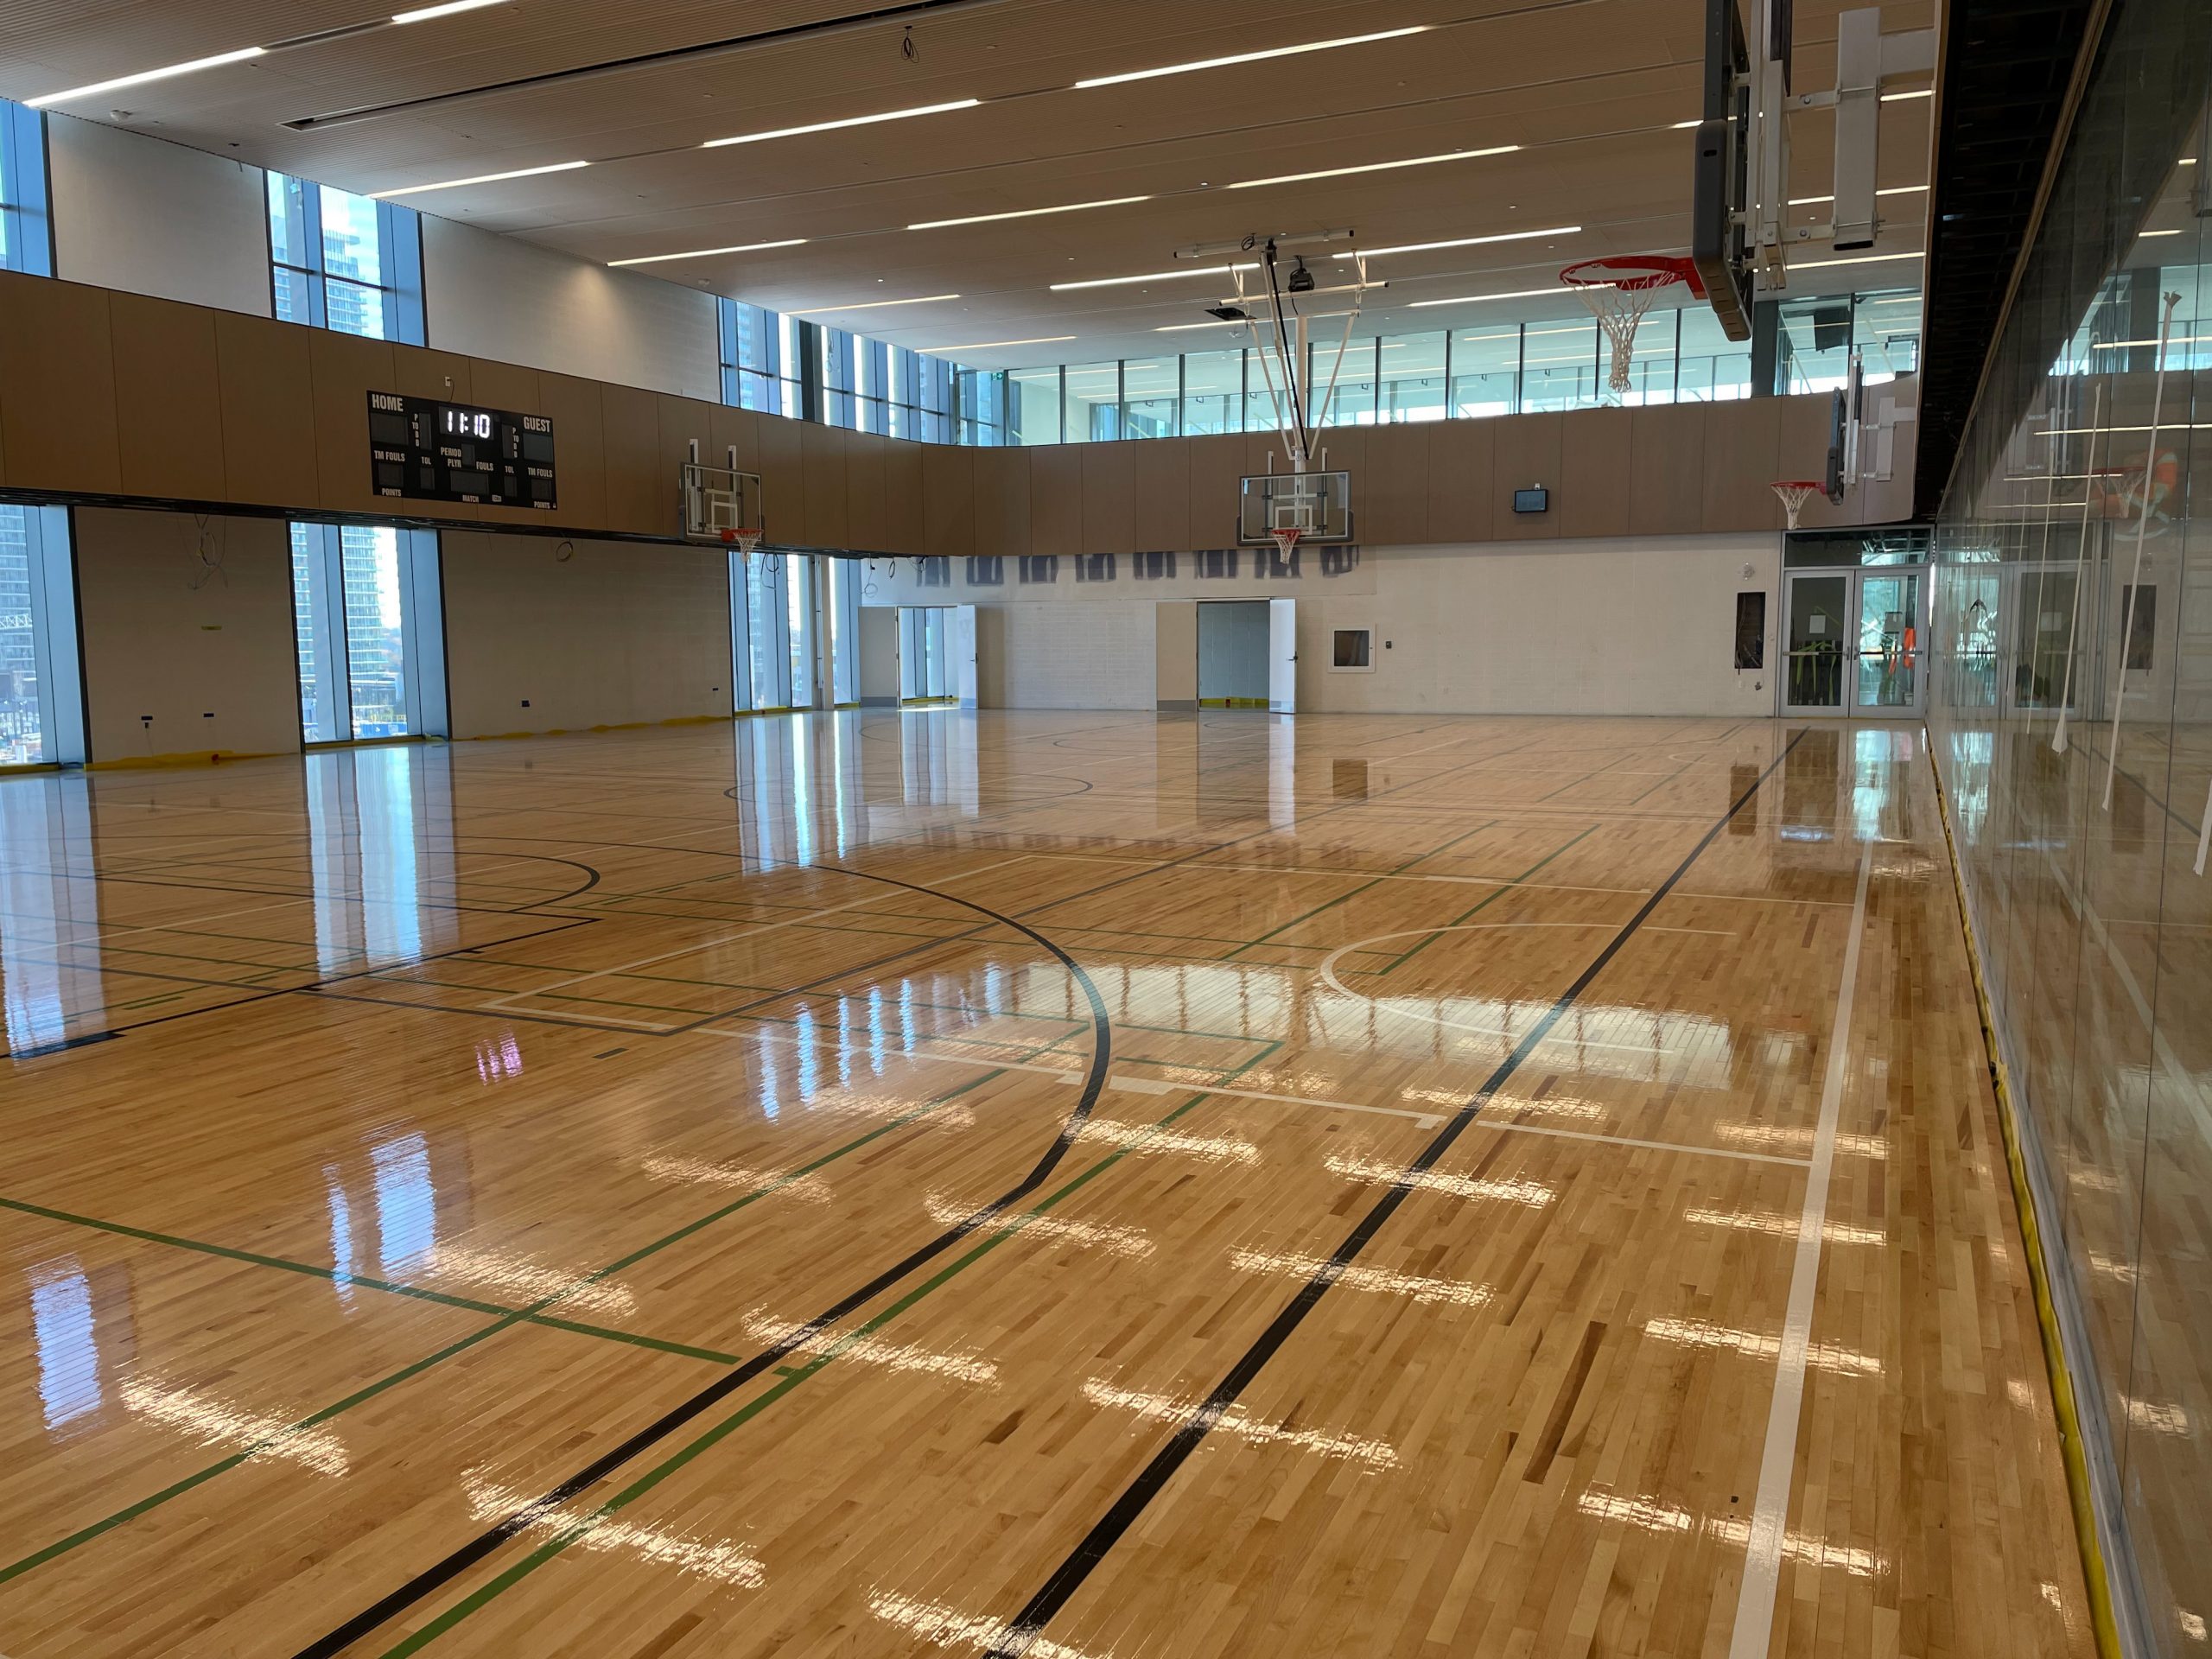 A photograph showing the construction progress of the gymnasium in the new Ethennonnhawahstihnen’ Community Recreation Centre. The photo shows a substantially completed gym, with basketball nets and a walking tracking on the second level around the perimeter of the gym. 